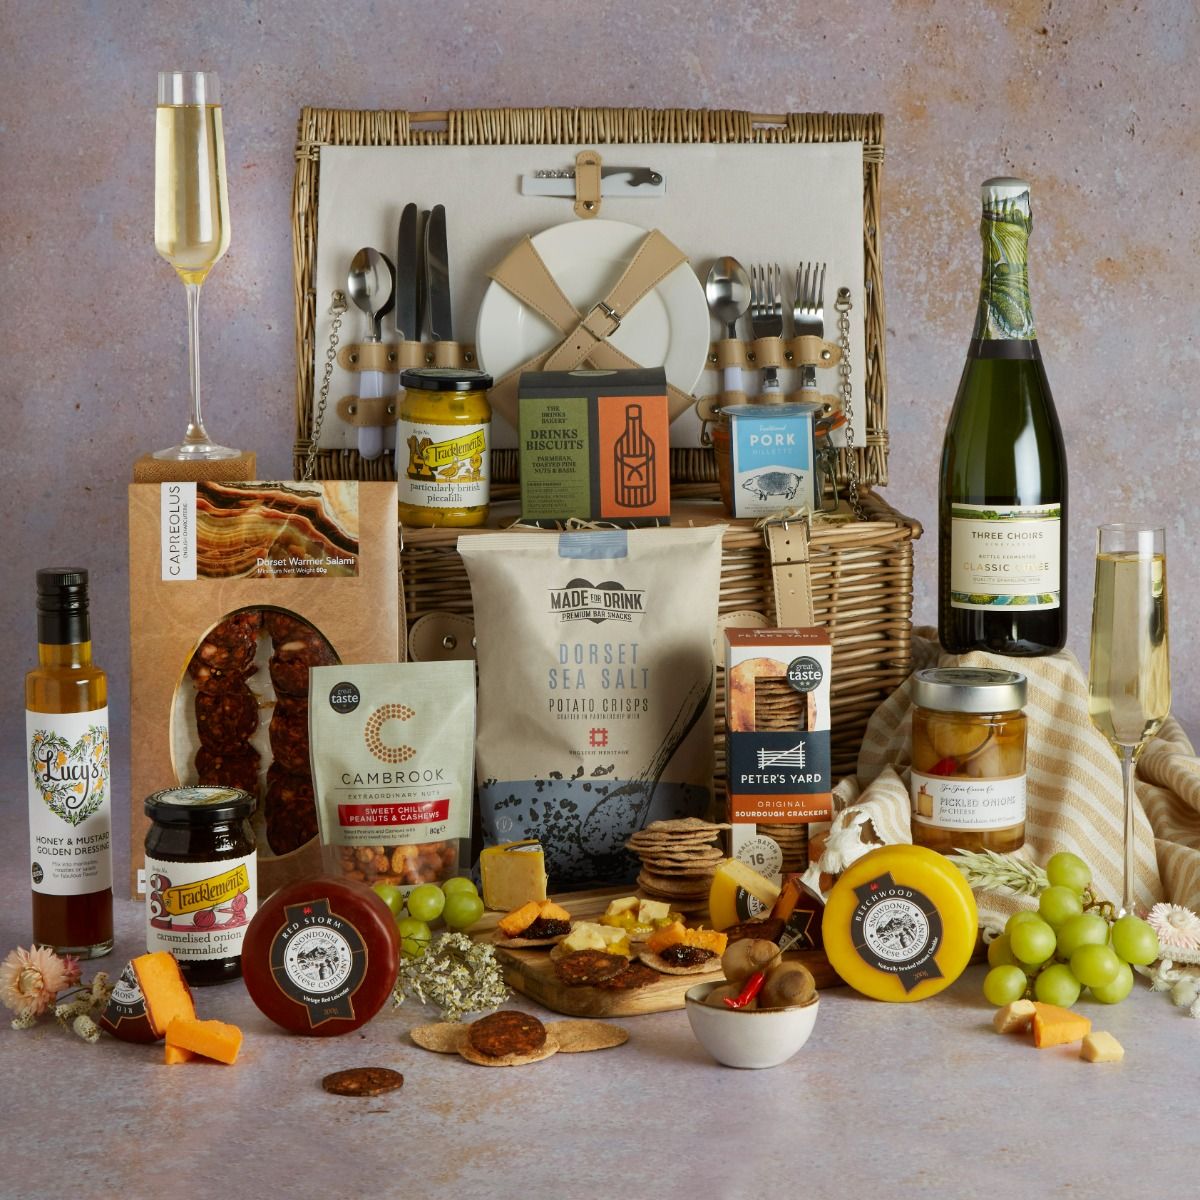 Best of British Picnic Hamper for four with contents on display